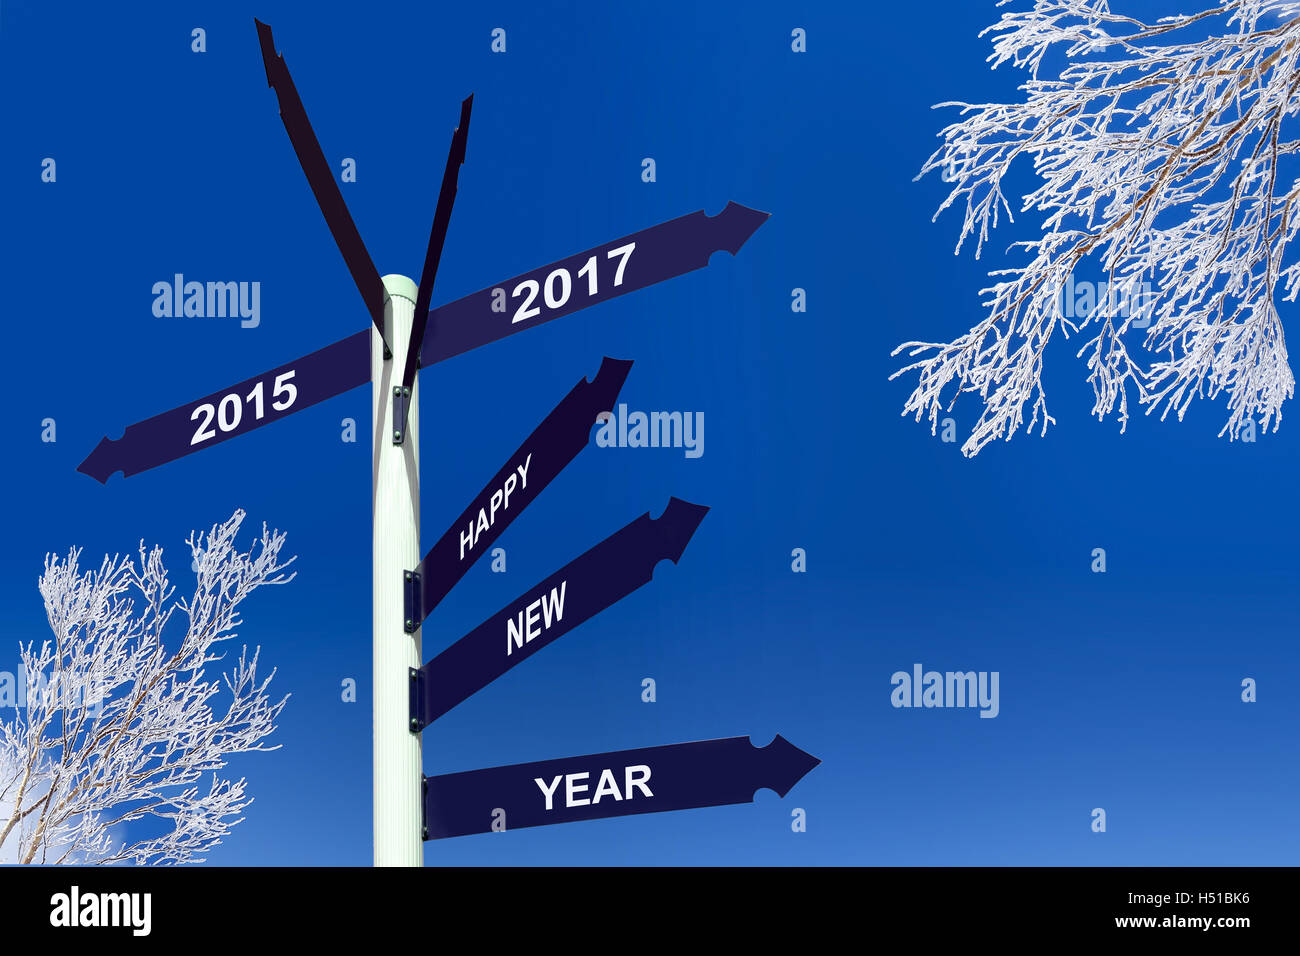 Happy new year 2017 on direction panels, snowy trees Stock Photo